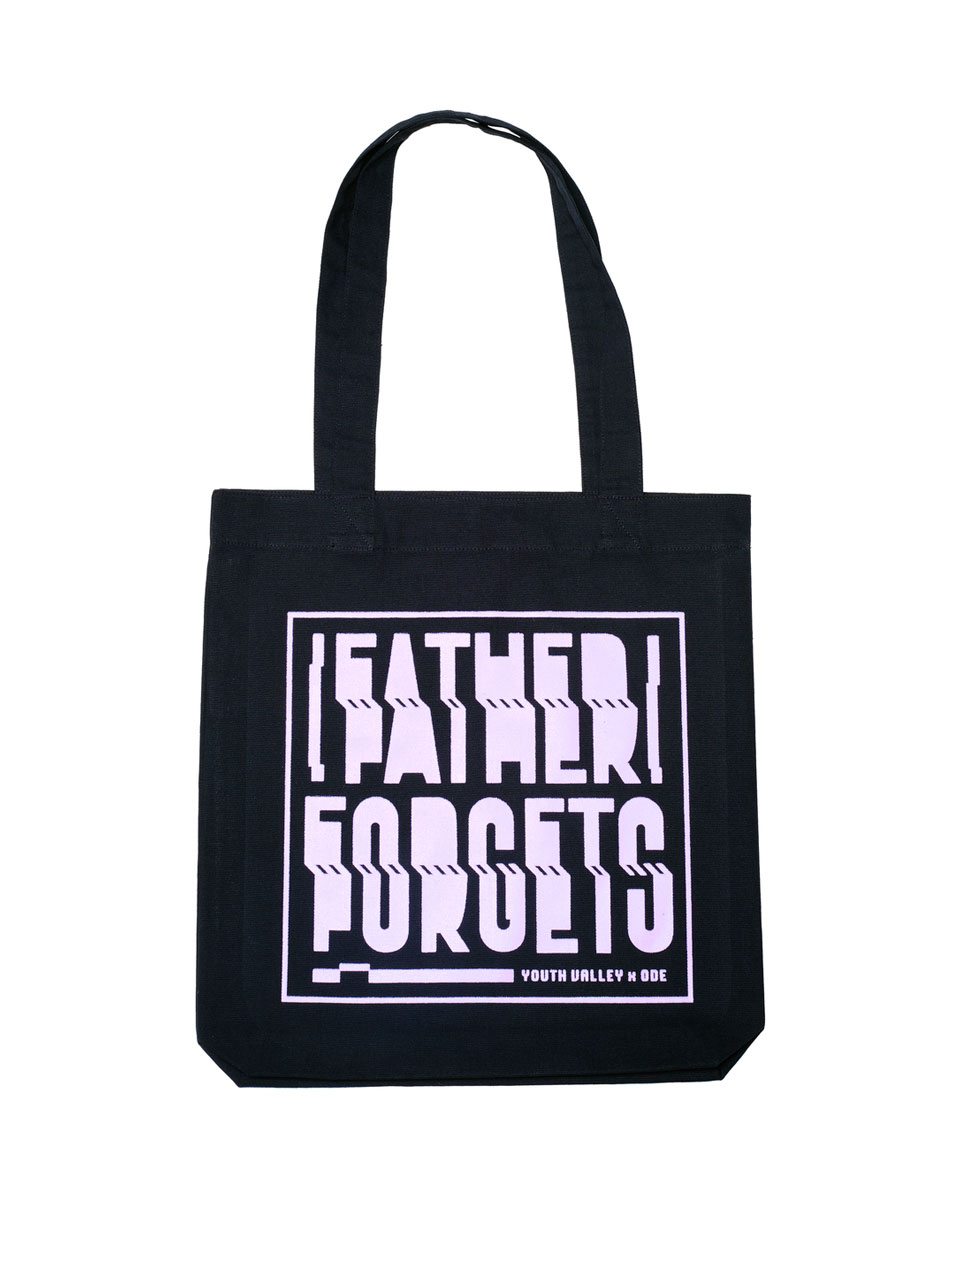 Ode Father forgets ODE x Youth Valley Tote Bag